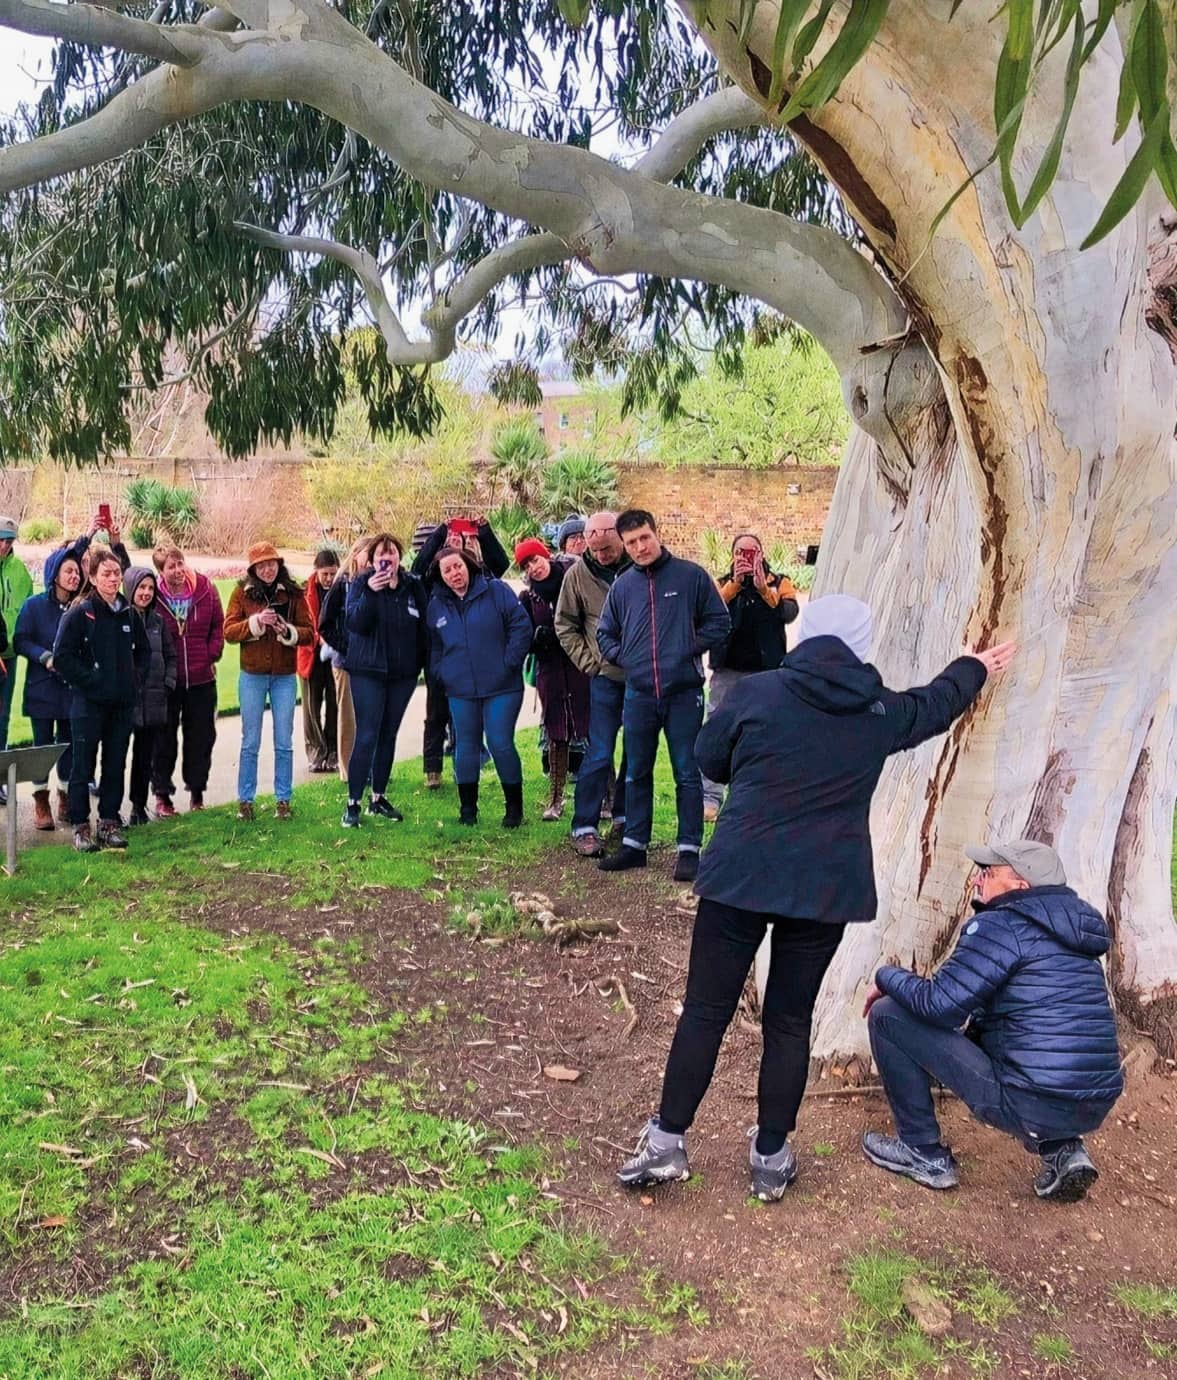 Stefania Gasperini and Giovanni Morelli lead the attendees on their specially created morphophysiology tree walk.